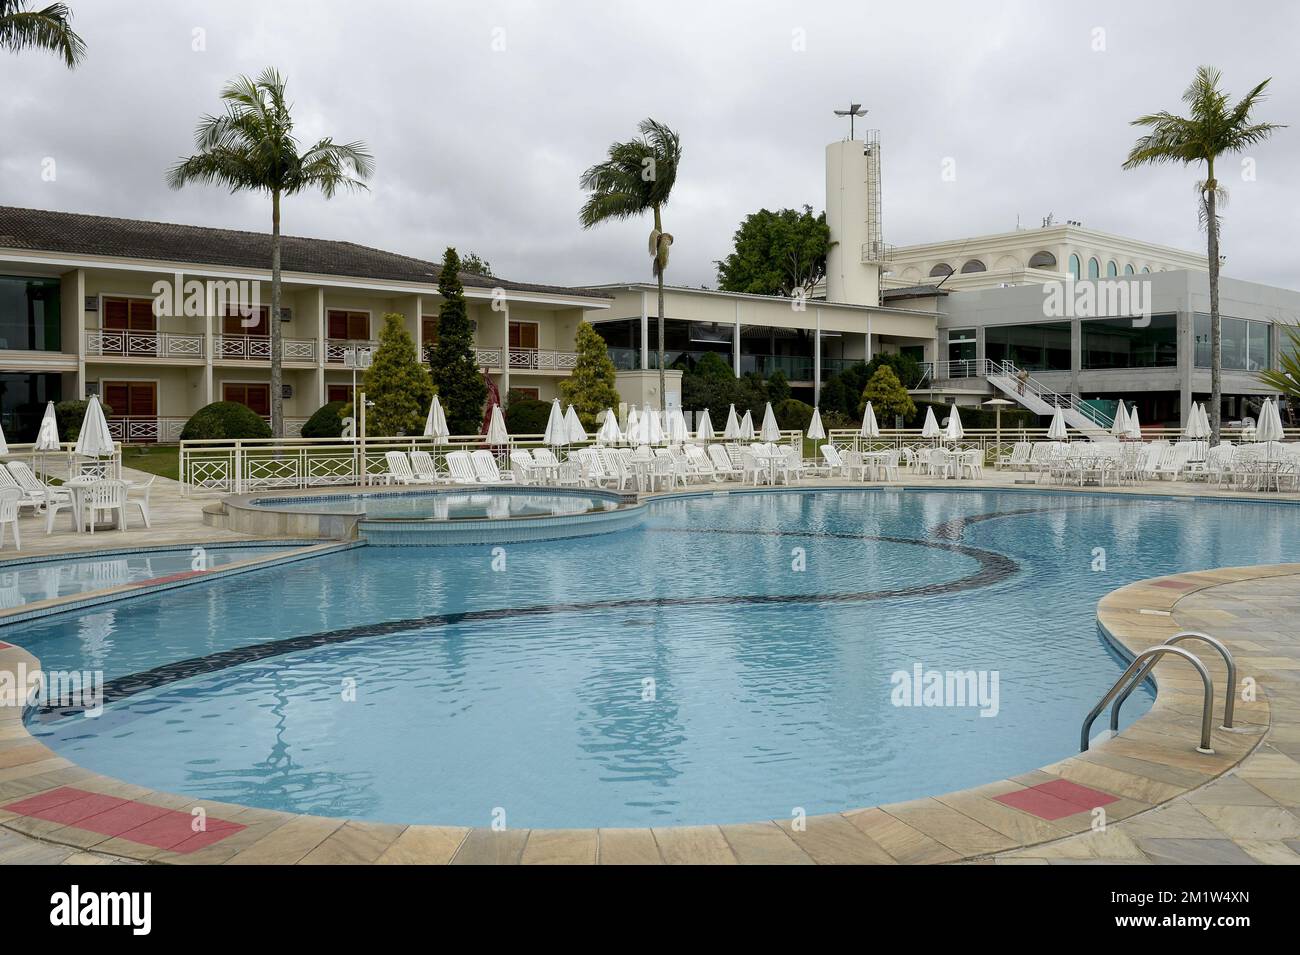 Illustration picture shows the swimming pool at the Paradise Golf and Lake resort where Belgian national soccer team Red Devils will be staying in Mogi Das Cruzes, Brazil, Monday 09 June 2014. The Belgian national soccer team Red Devils will reside at the hotel in Mogi Das Cruzes during the 2014 Fifa World Cup that takes place from 12 June till 13 July in Brazil. Stock Photo